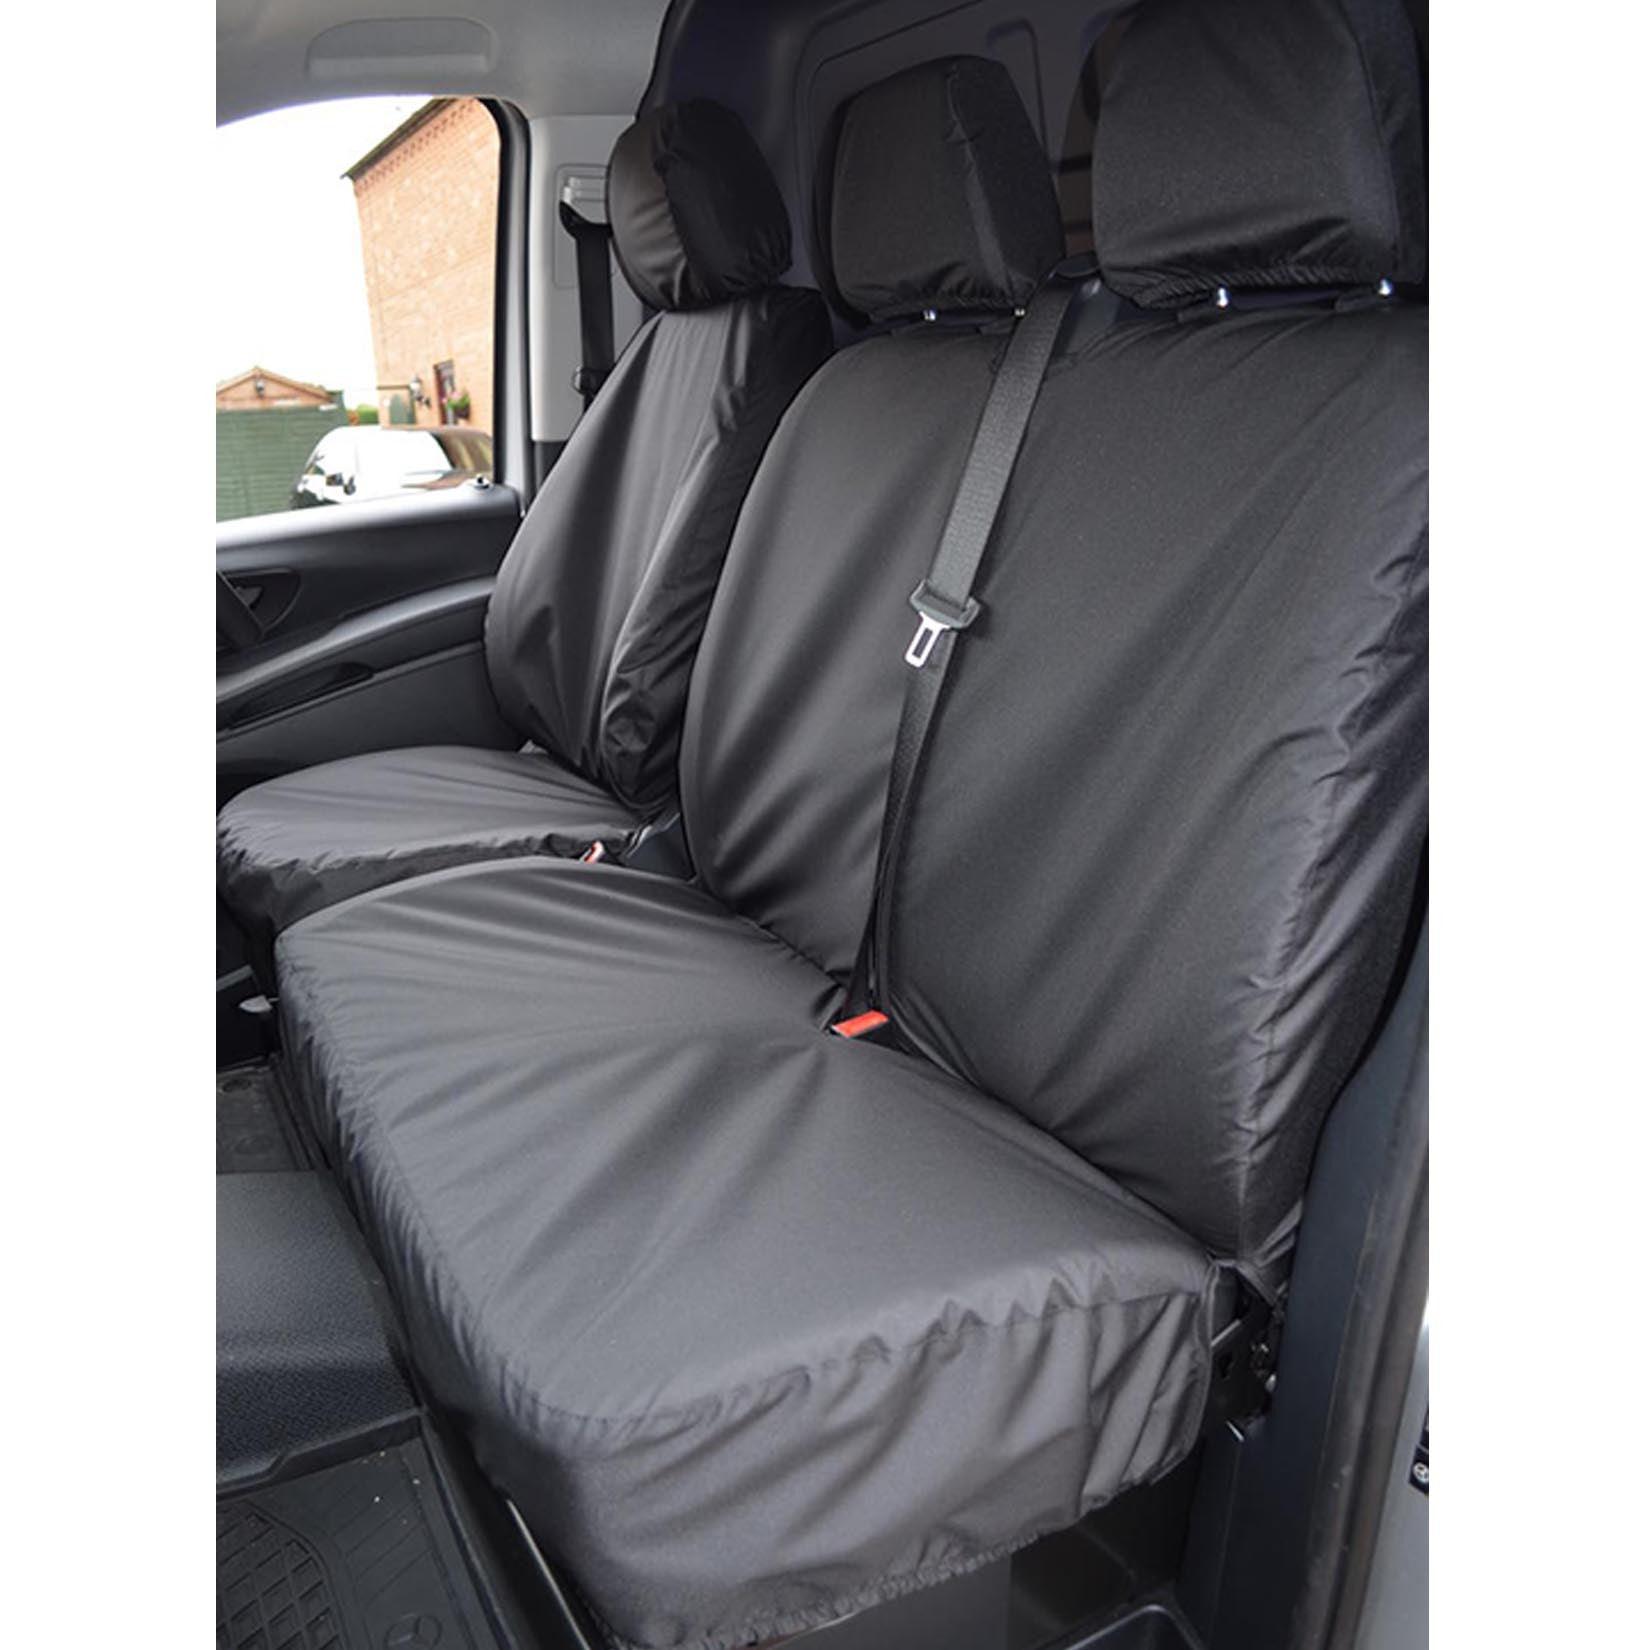 MERCEDES VITO 2015 ON FRONT TRIPLE TAILORED SEAT COVERS IN BLACK - Storm Xccessories2